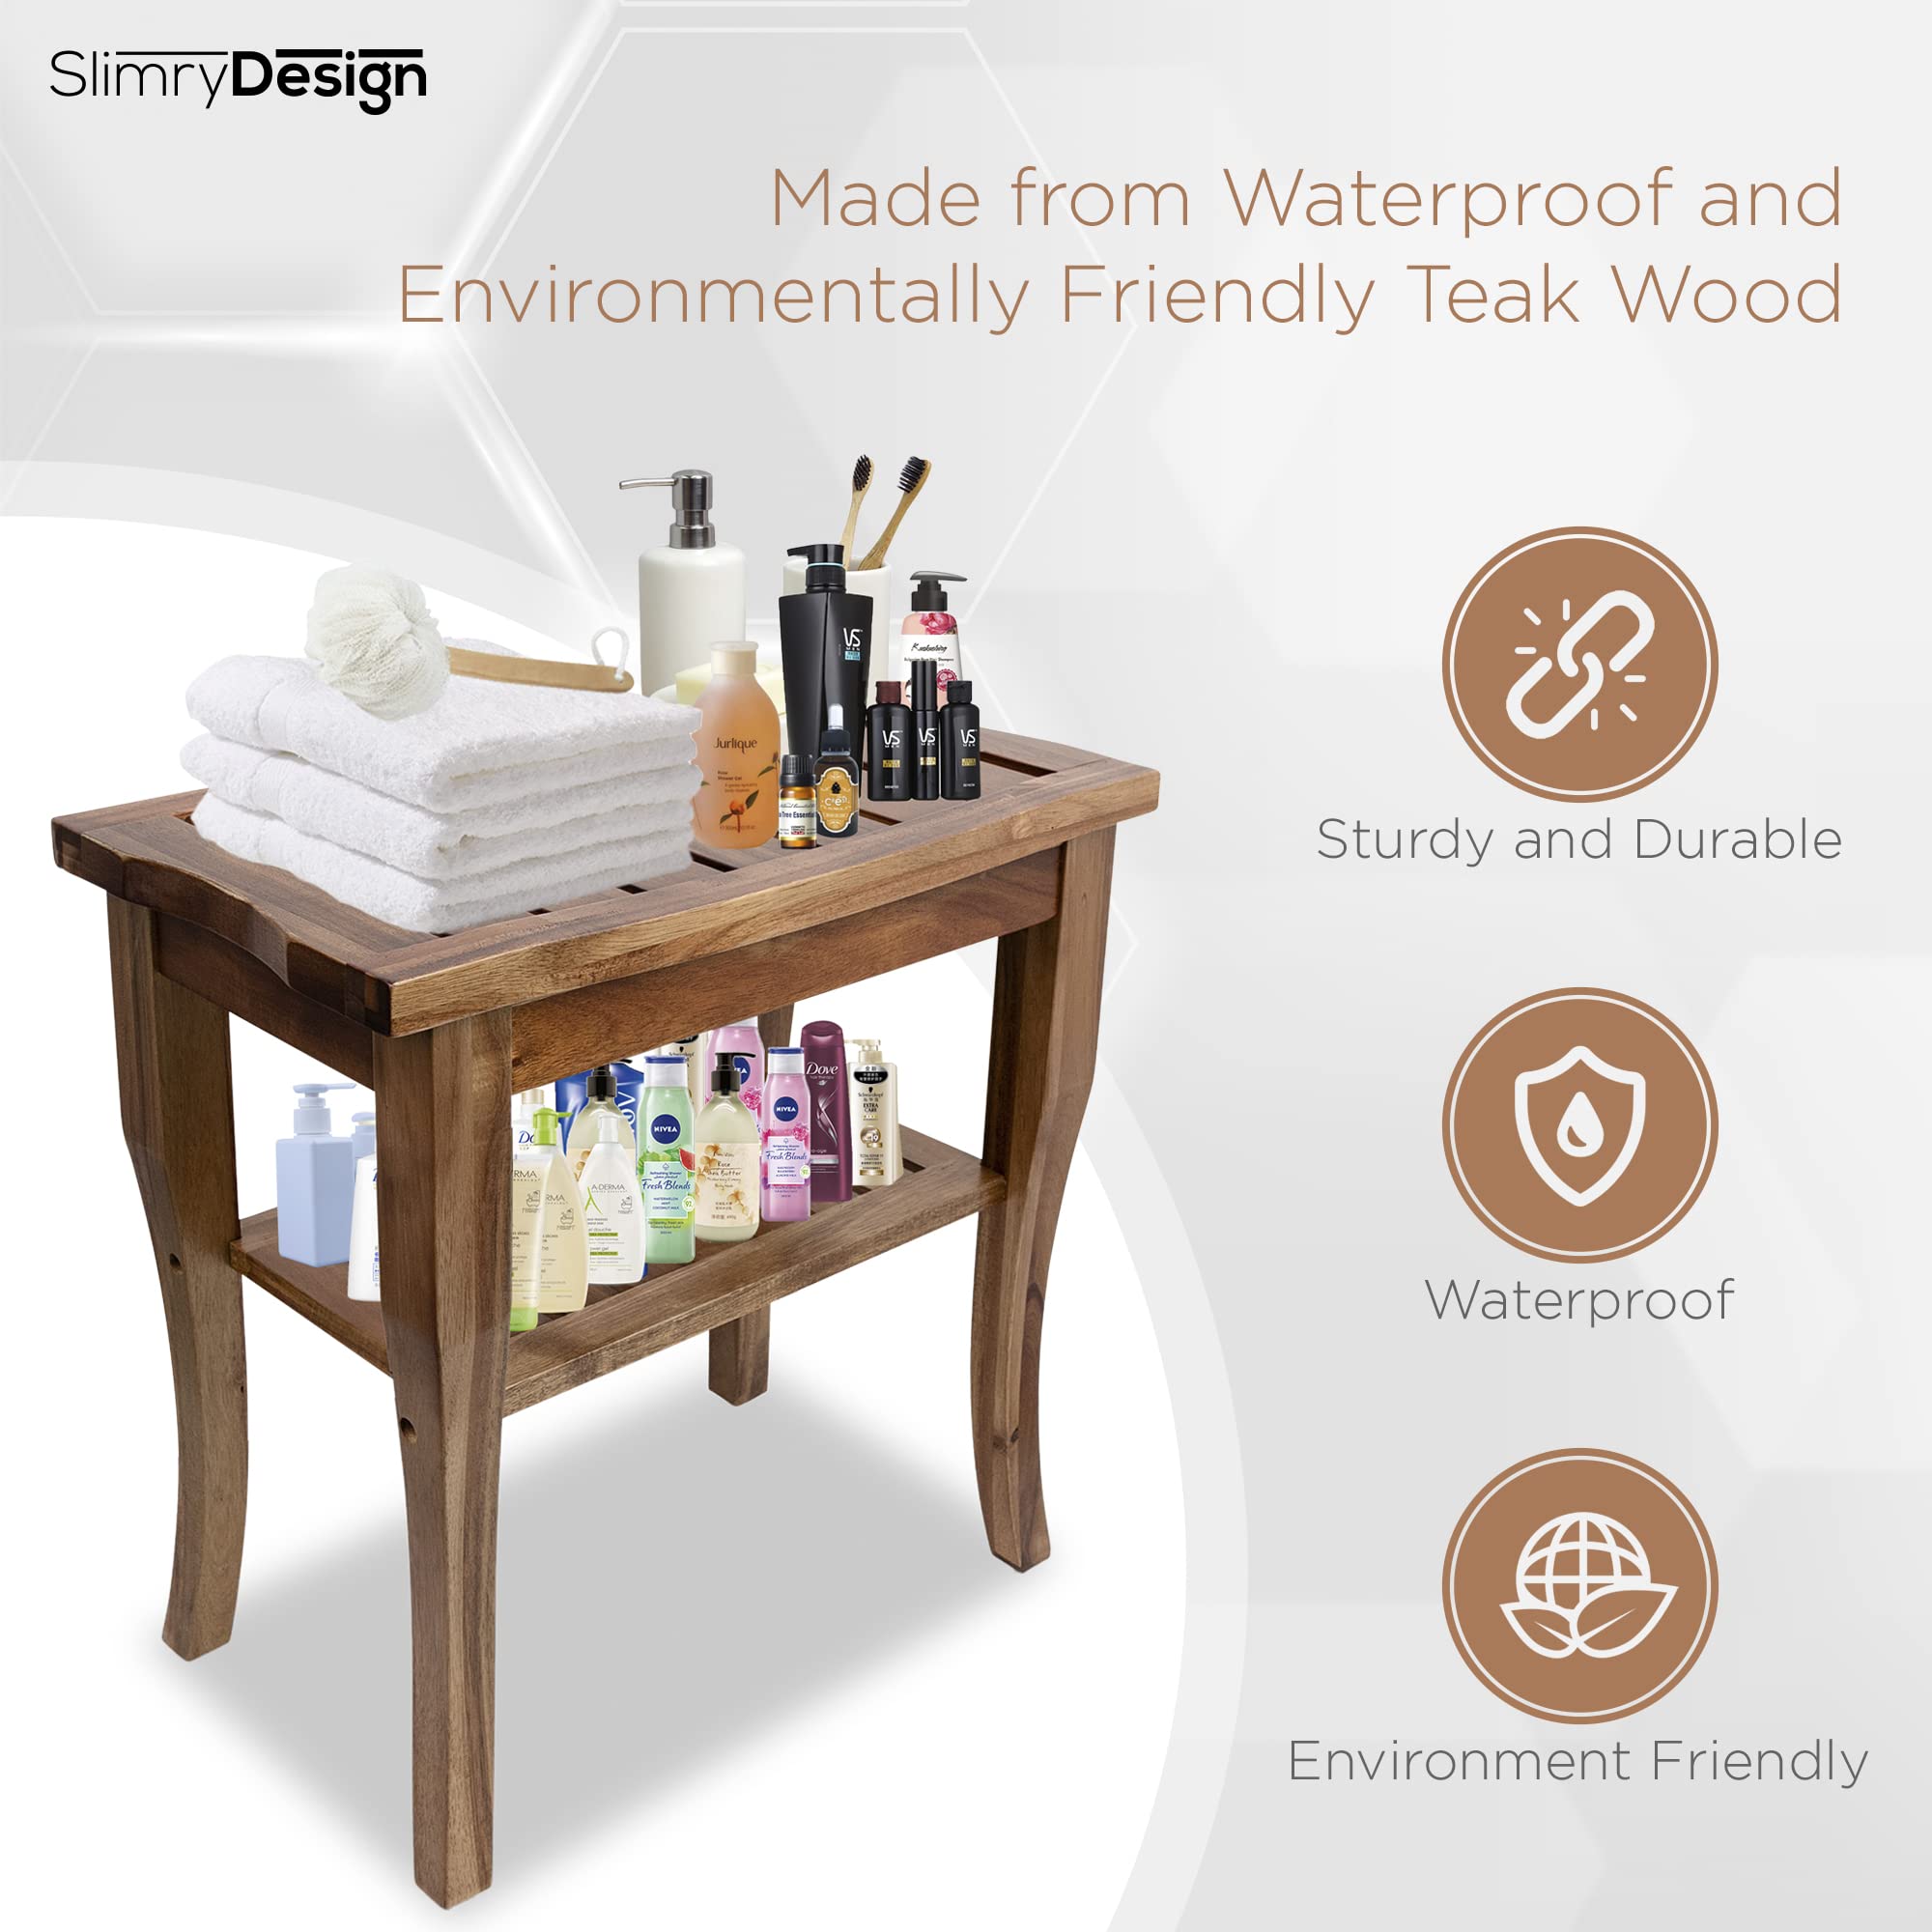 Slimry Design Teak Shower Bench - Solid and Water -Resistant Teak Bench with Storage Shelf Easy to Use Bath Stool with Non-Slip Pads -Assembly Required  - Like New